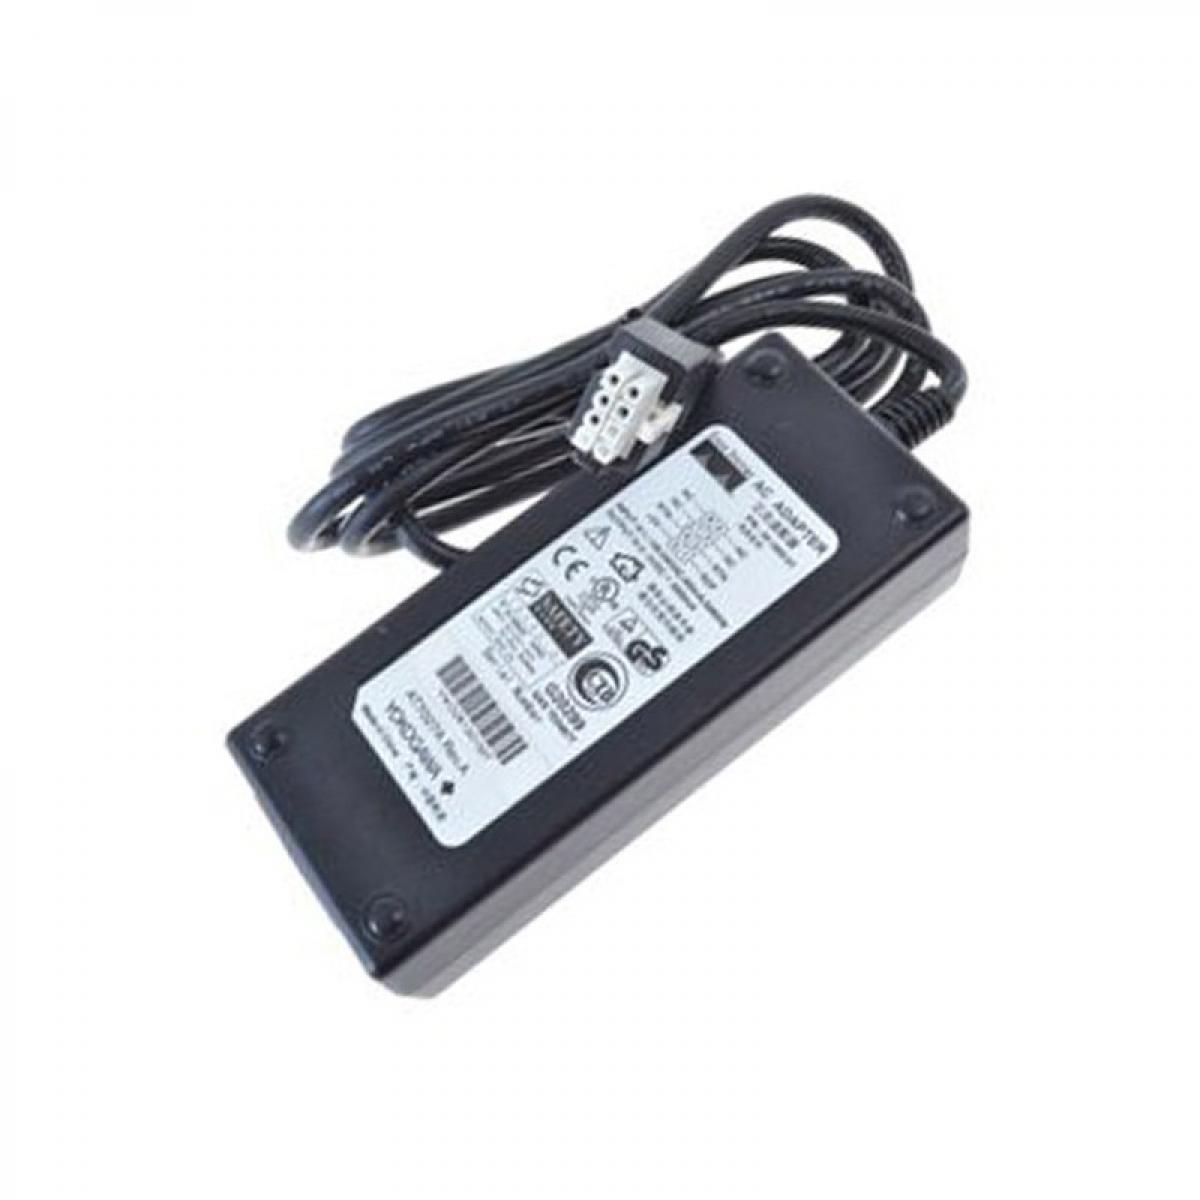 Cisco Linksys - Chargeur Secteur CISCO SYSTEMS AT7027A 34-1855-01 010592-00 91-59642 5V 3A - Alimentation modulaire